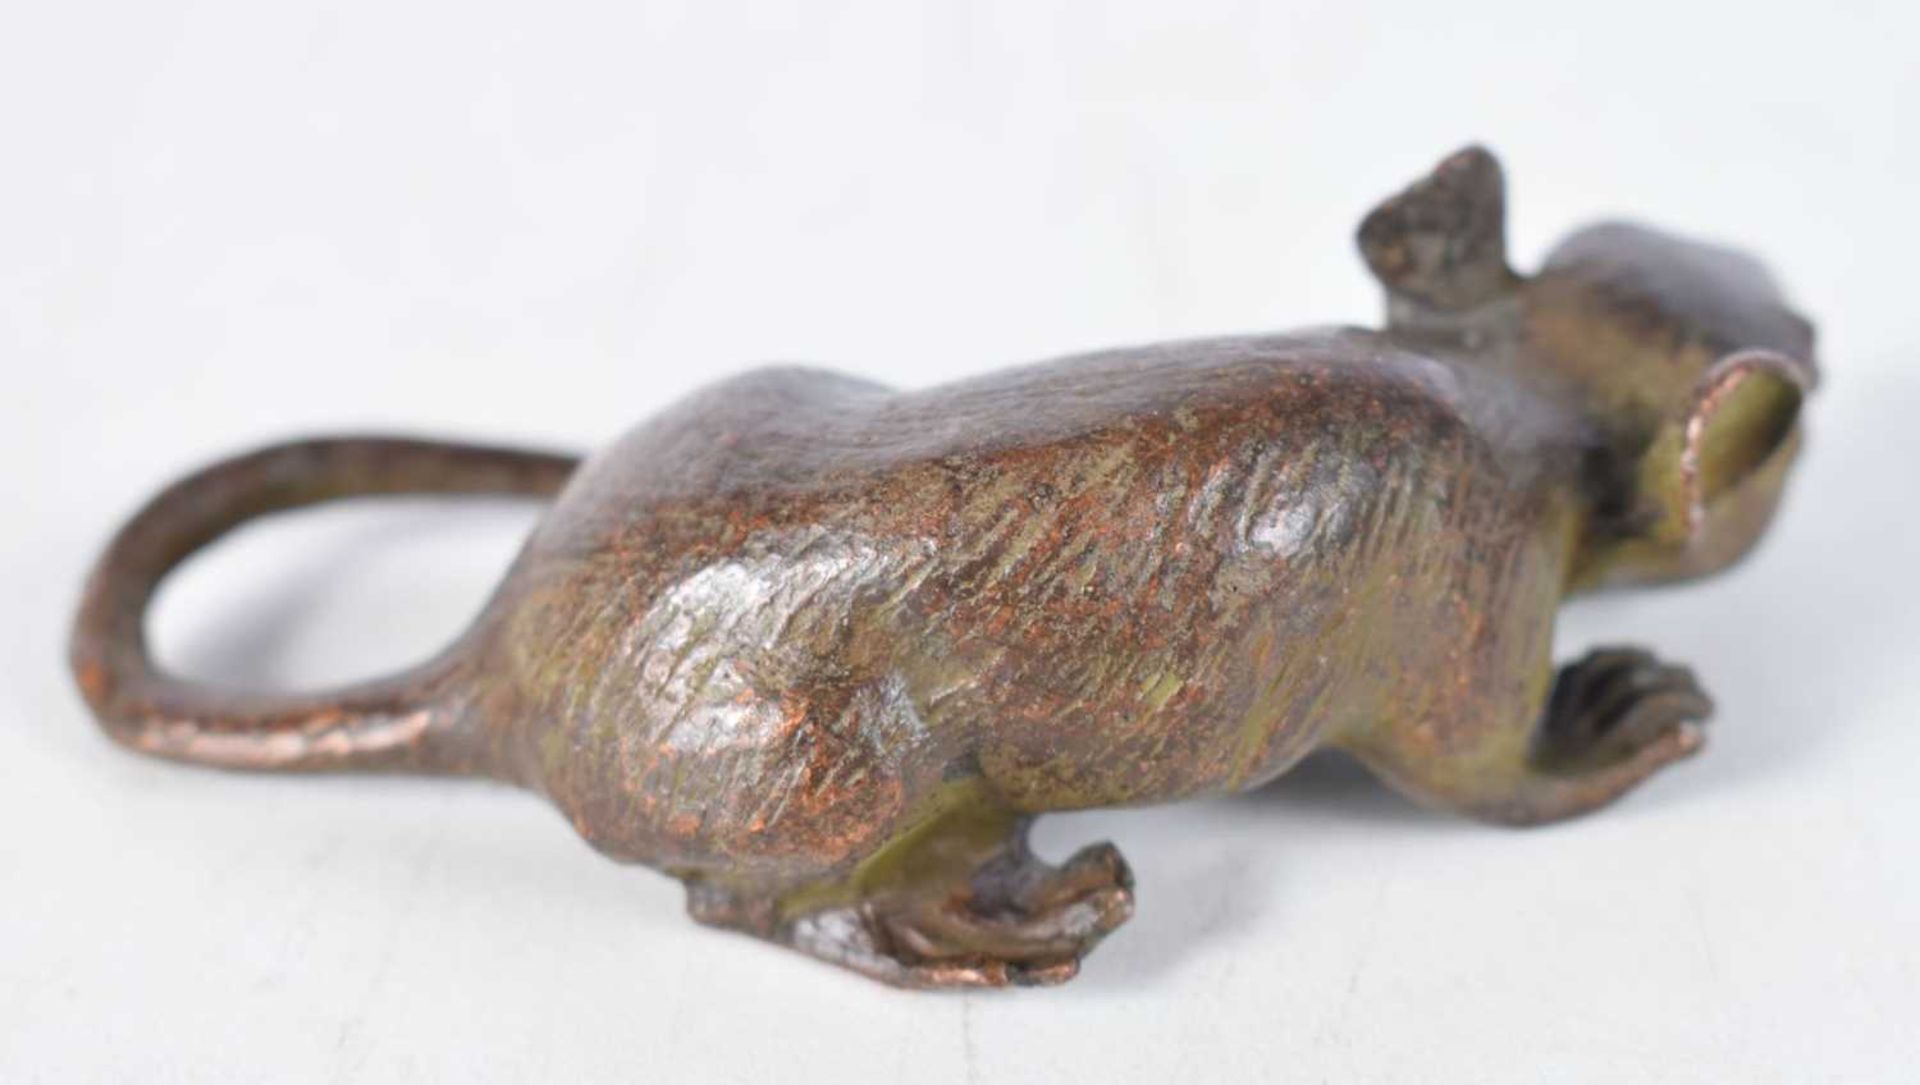 A Japanese Bronze Model of a Rat. 2.2 cm x 8.2 cm x 4.4cm, weight 167g - Image 2 of 3